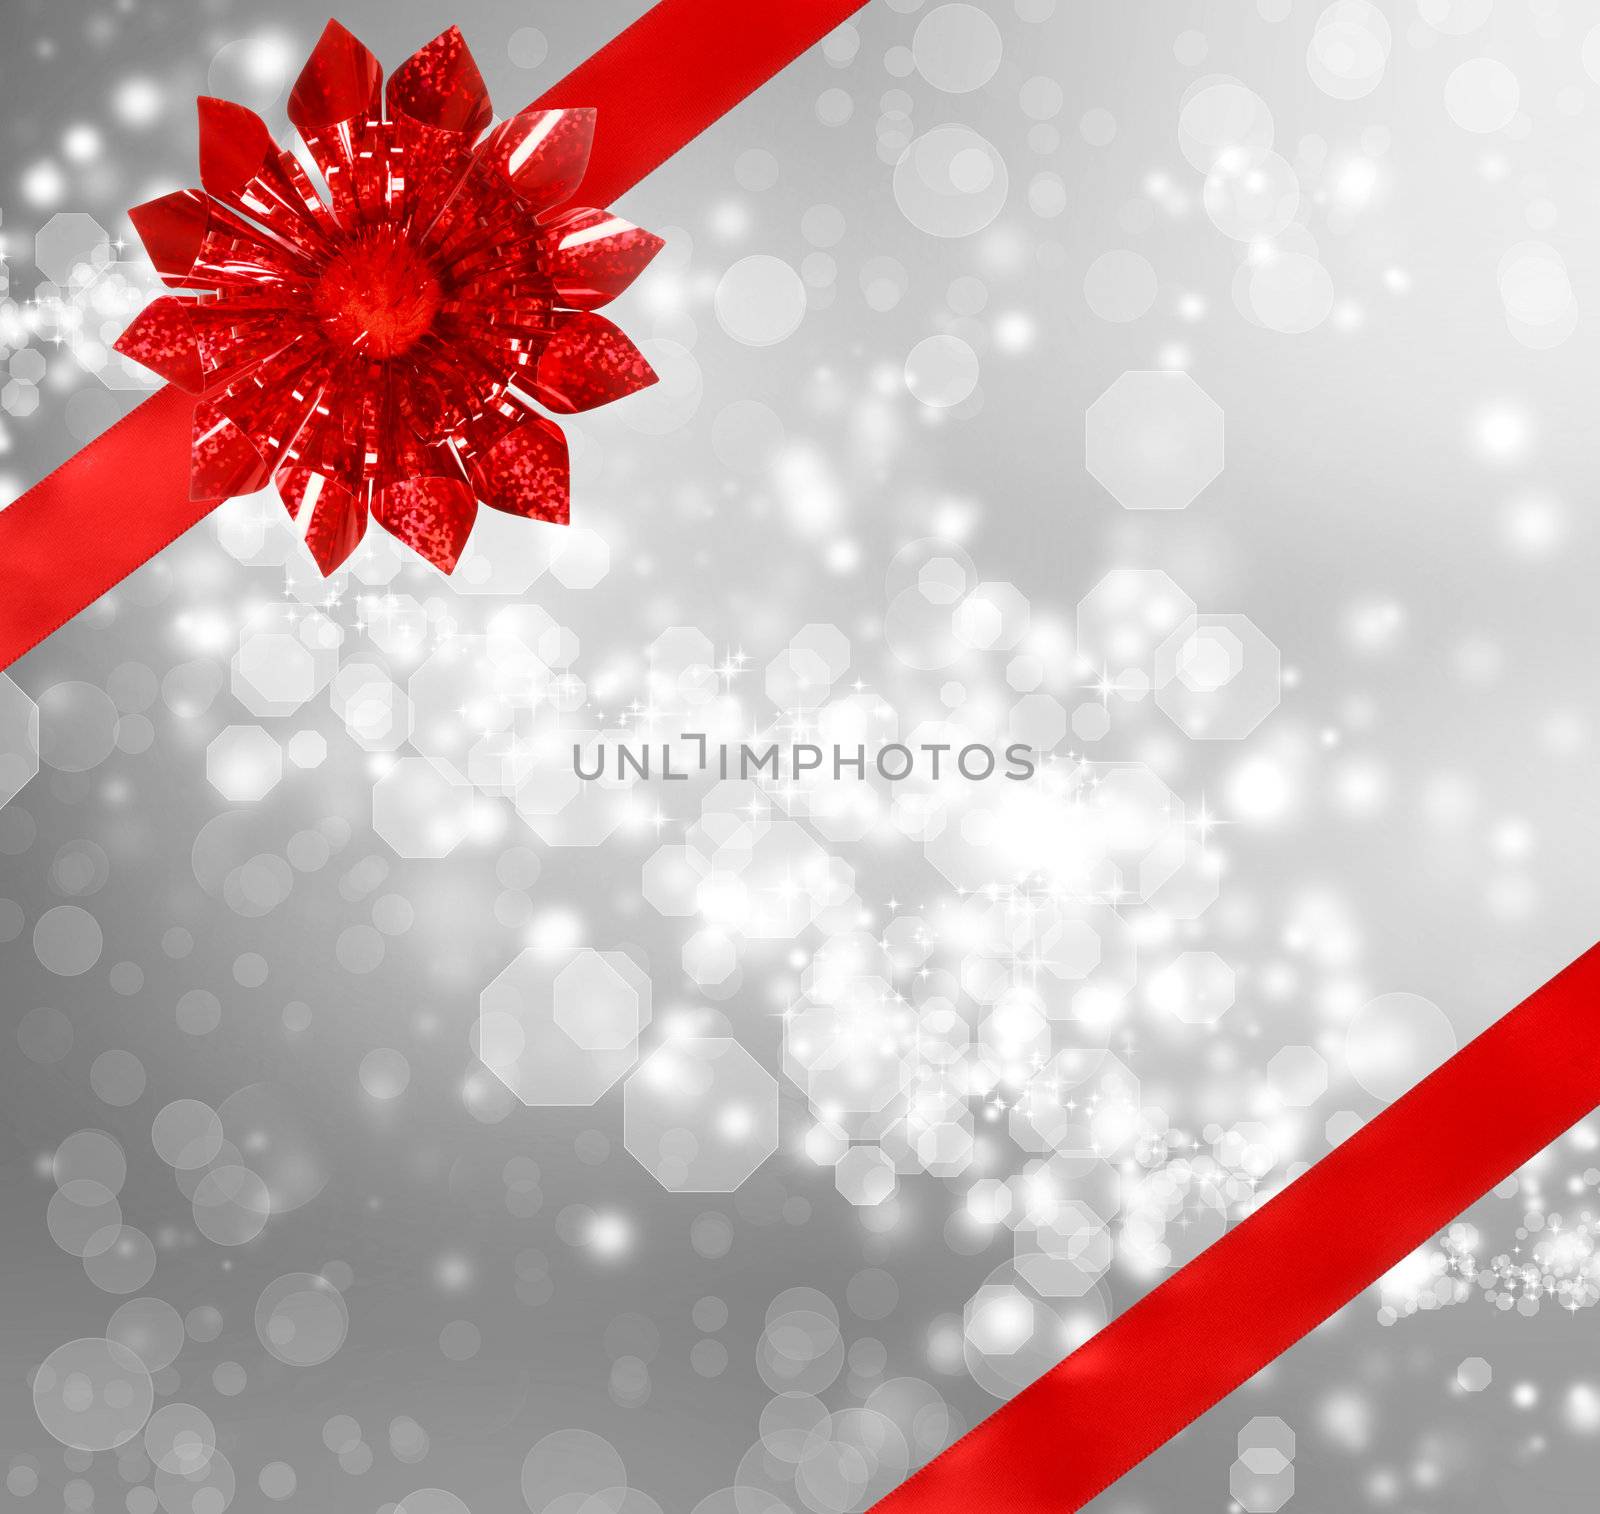 Red Bow and Ribbon with Silver Abstract Lights Background 